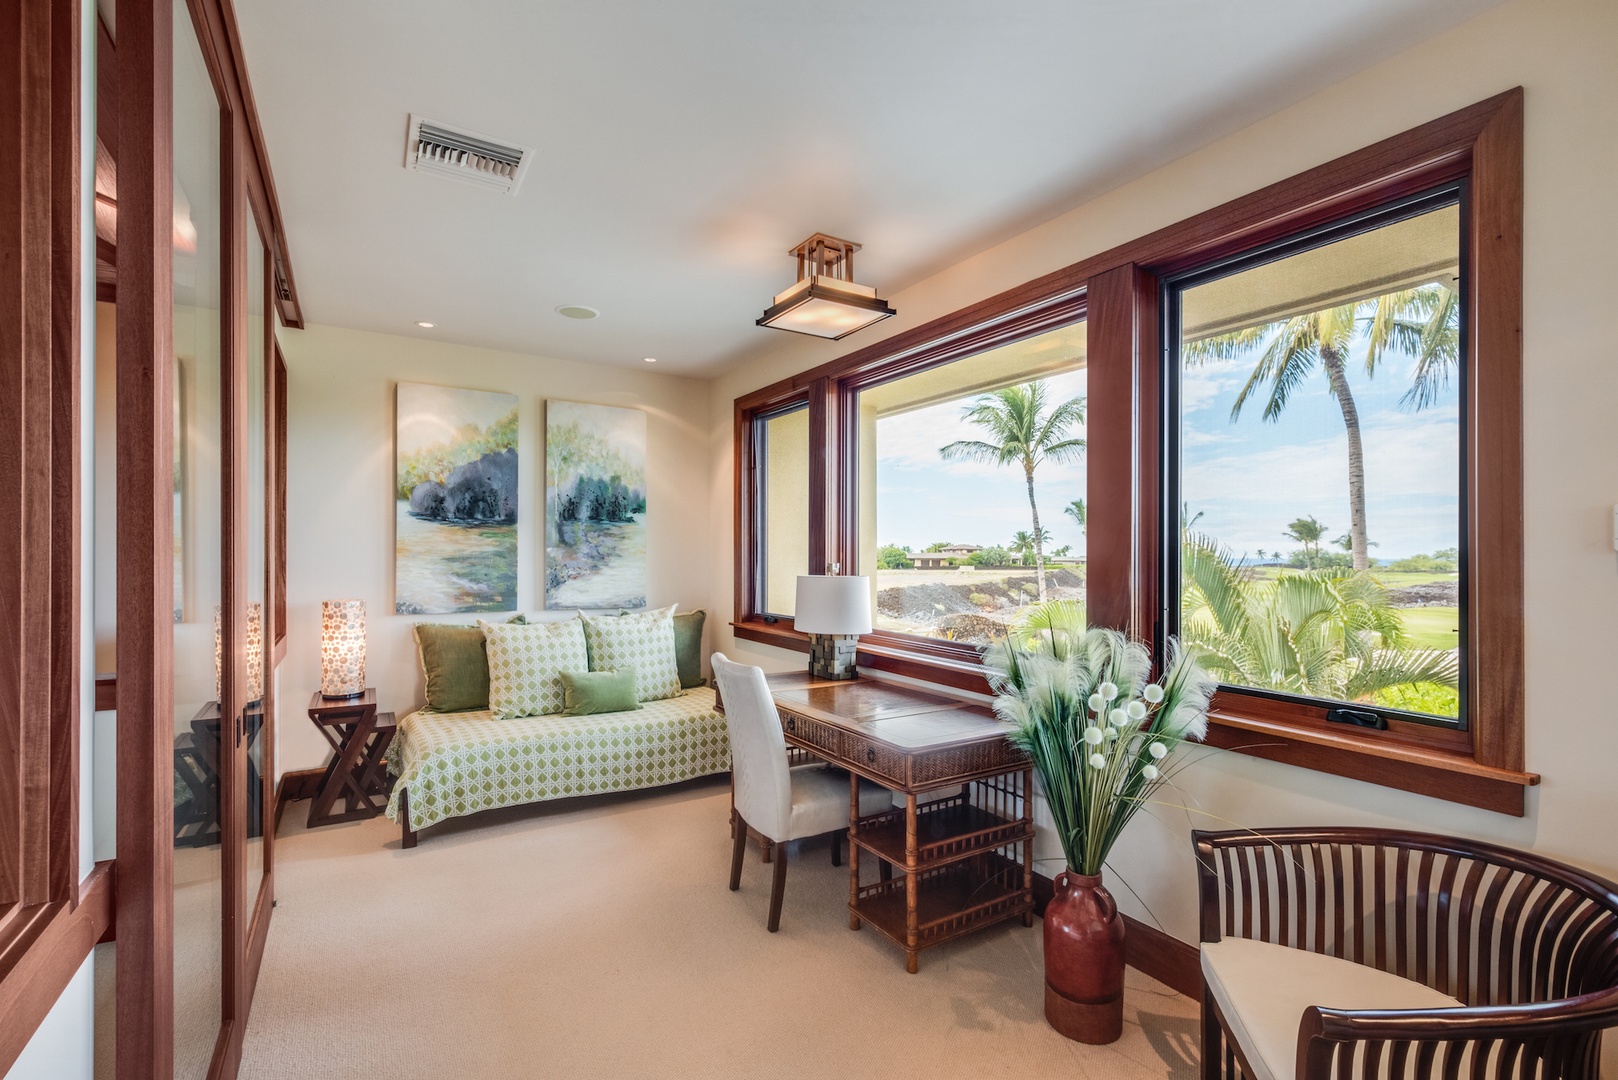 Kamuela Vacation Rentals, 3BD Ke Kailani (1C) at Mauna Lani Resort - Office Space w/ Twin Daybed and Expansive Golf Course View Attached to Upstairs Primary Bedroom